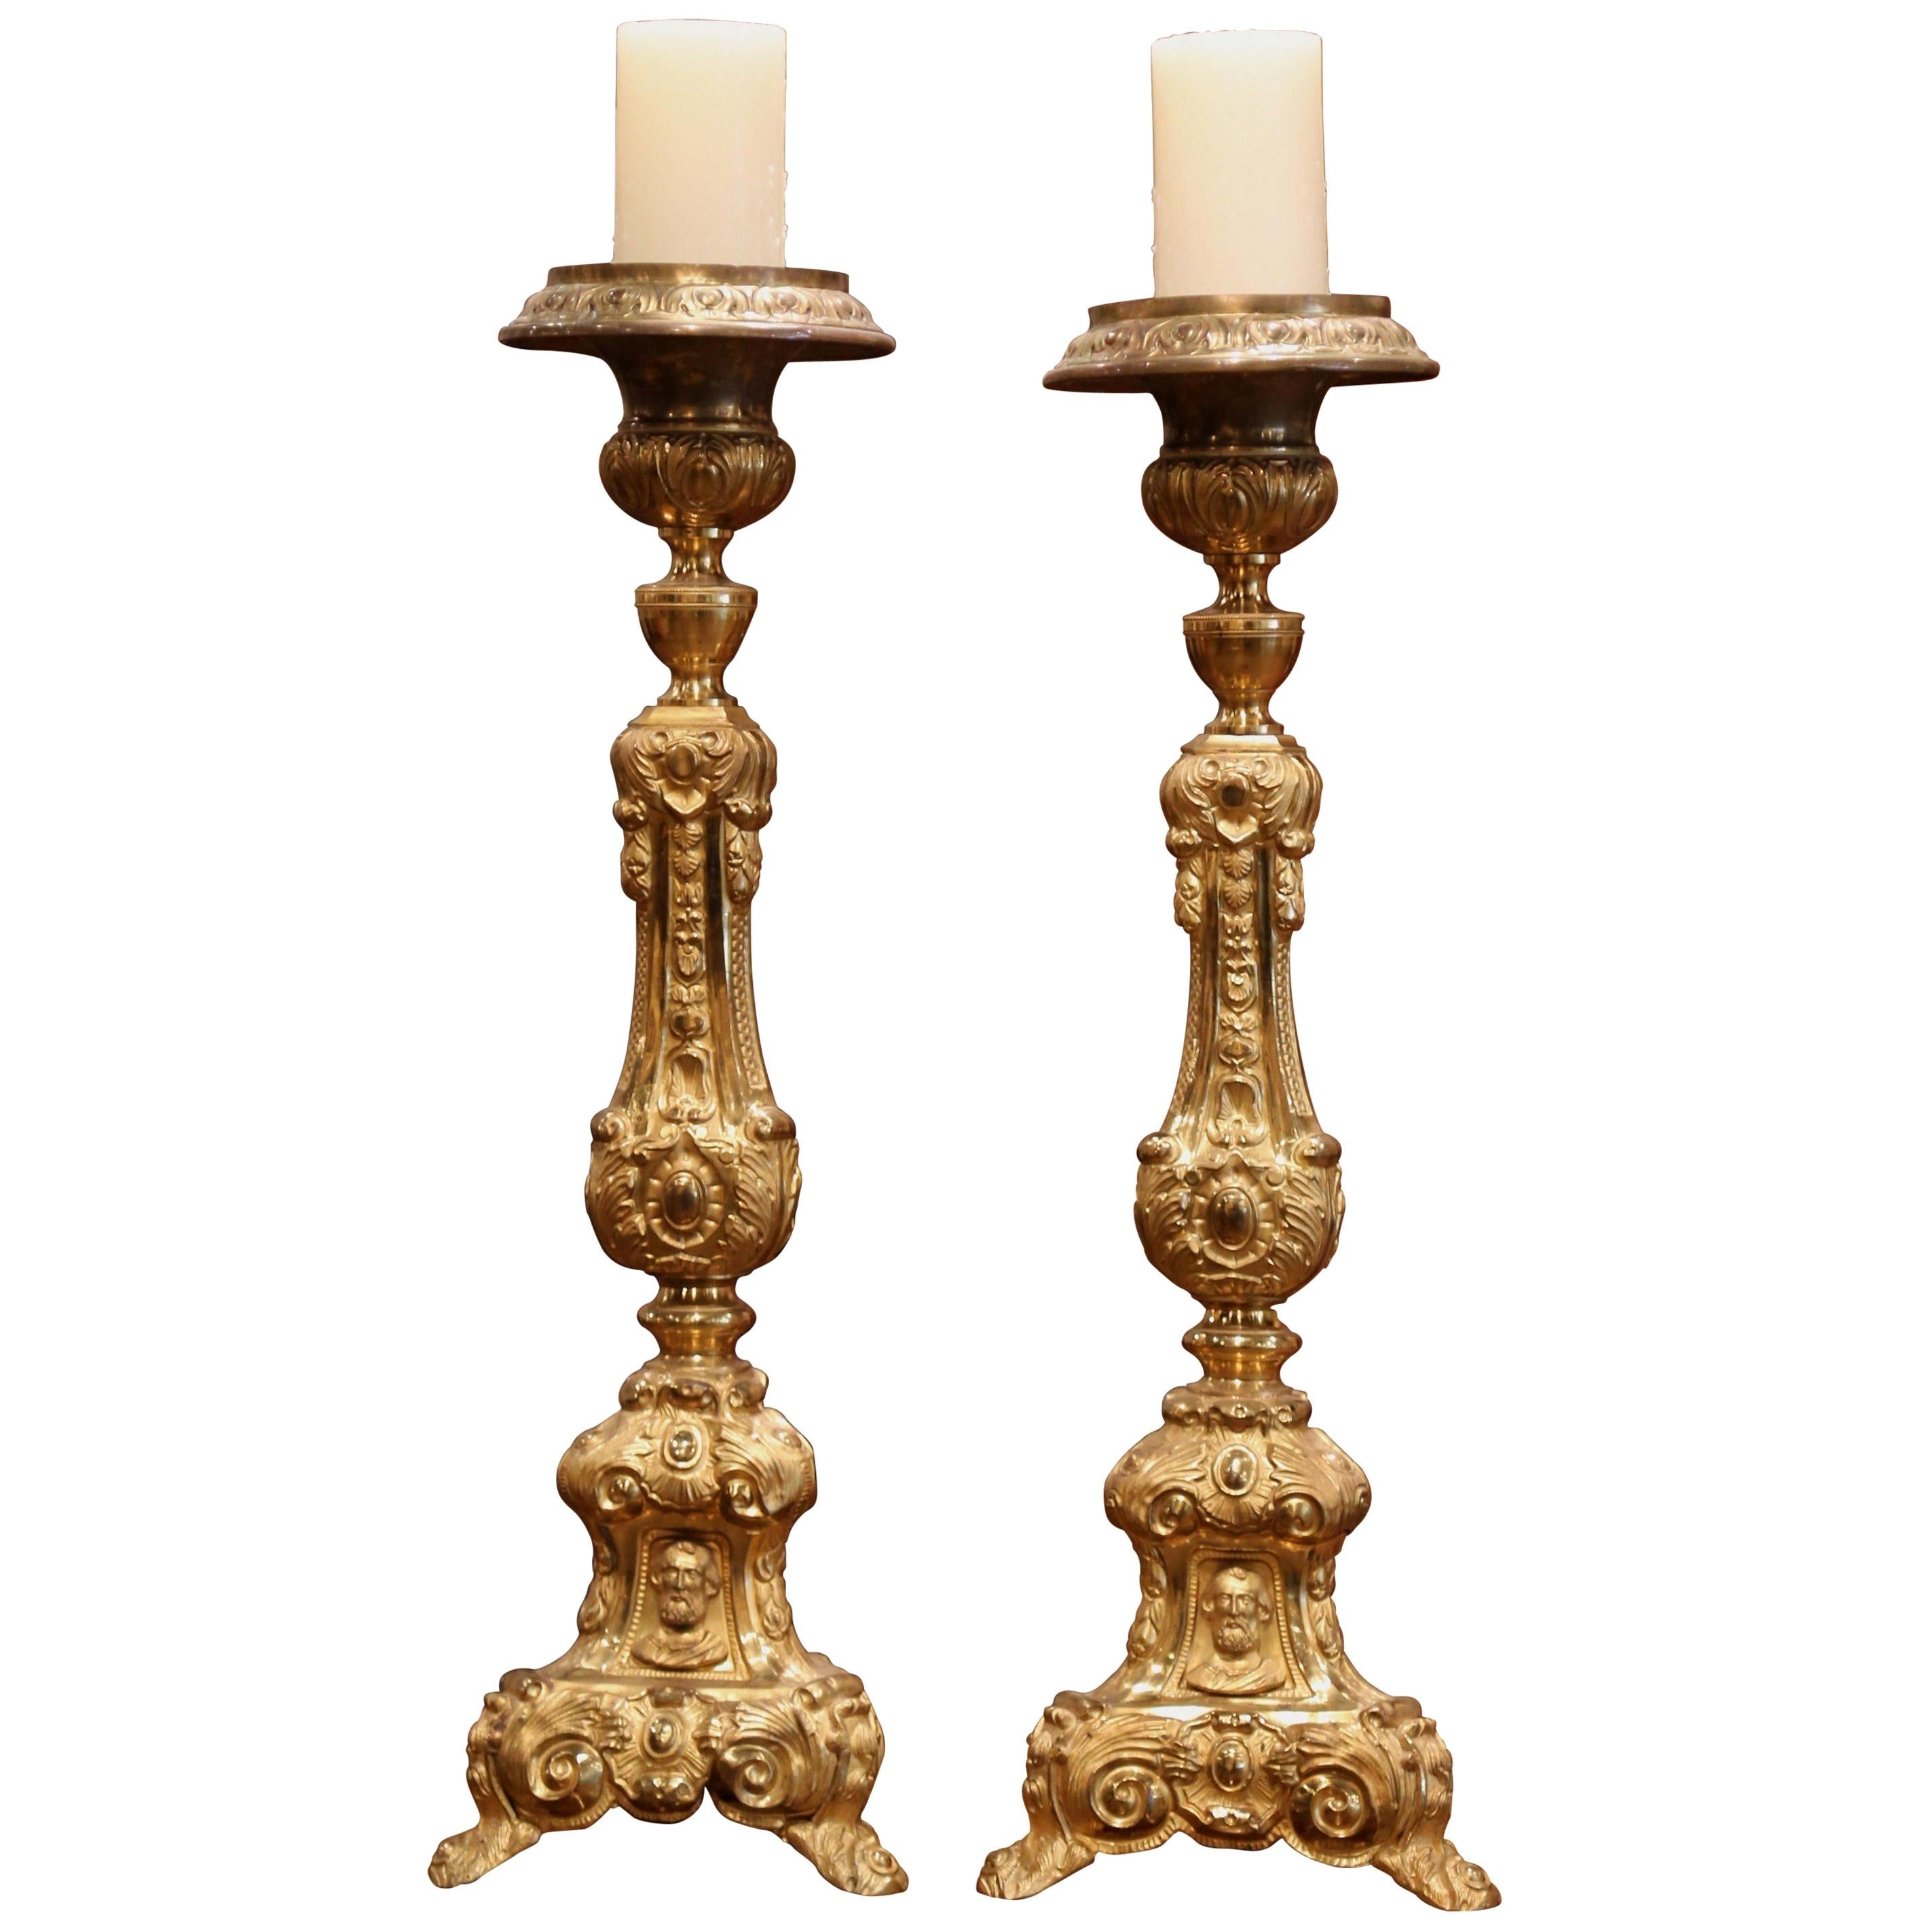 Pair of 19th Century French Brass Gilded Repousse Pic-Cierges Candleholders